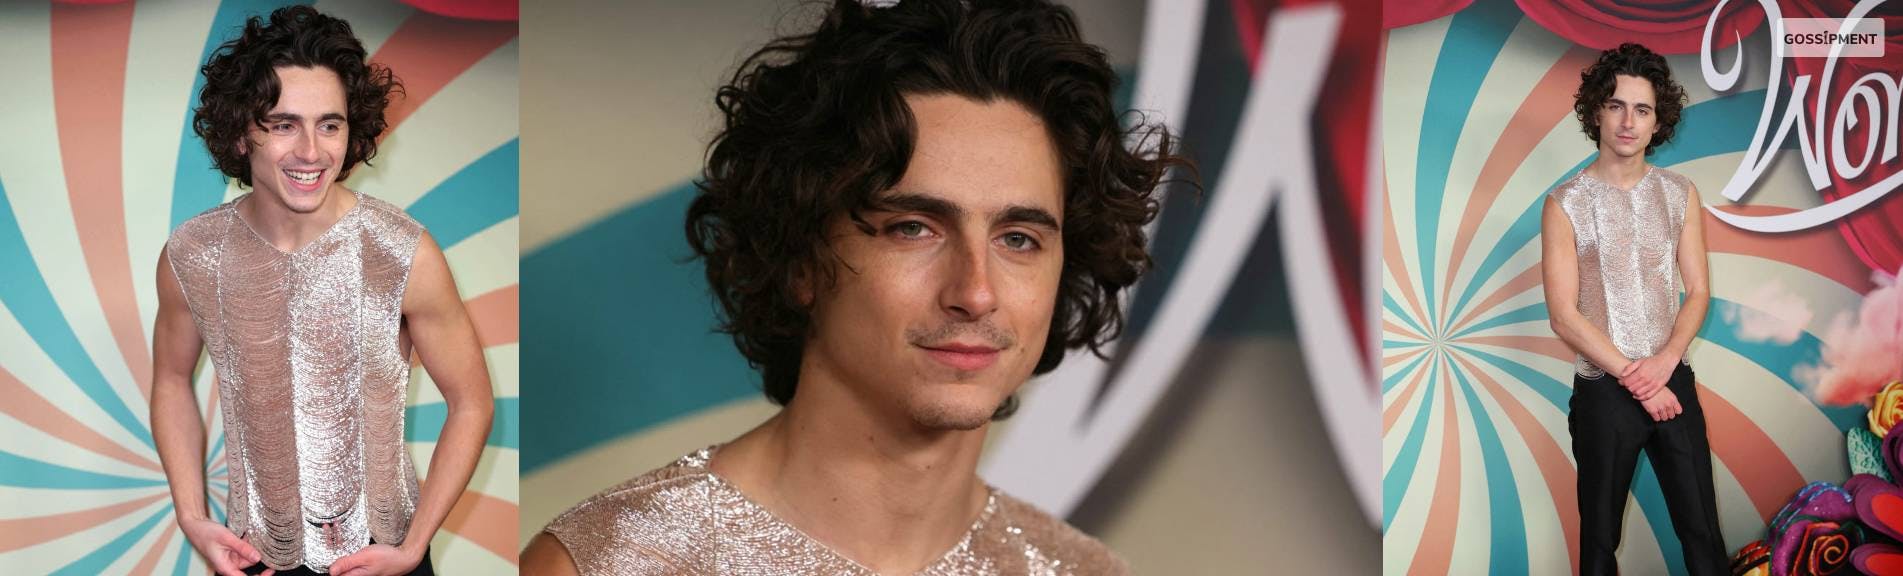 Cover Image for Timothée Chalamet Dares To Bare Chest On the Red Carpet Of “Wonka” Paris Premiere